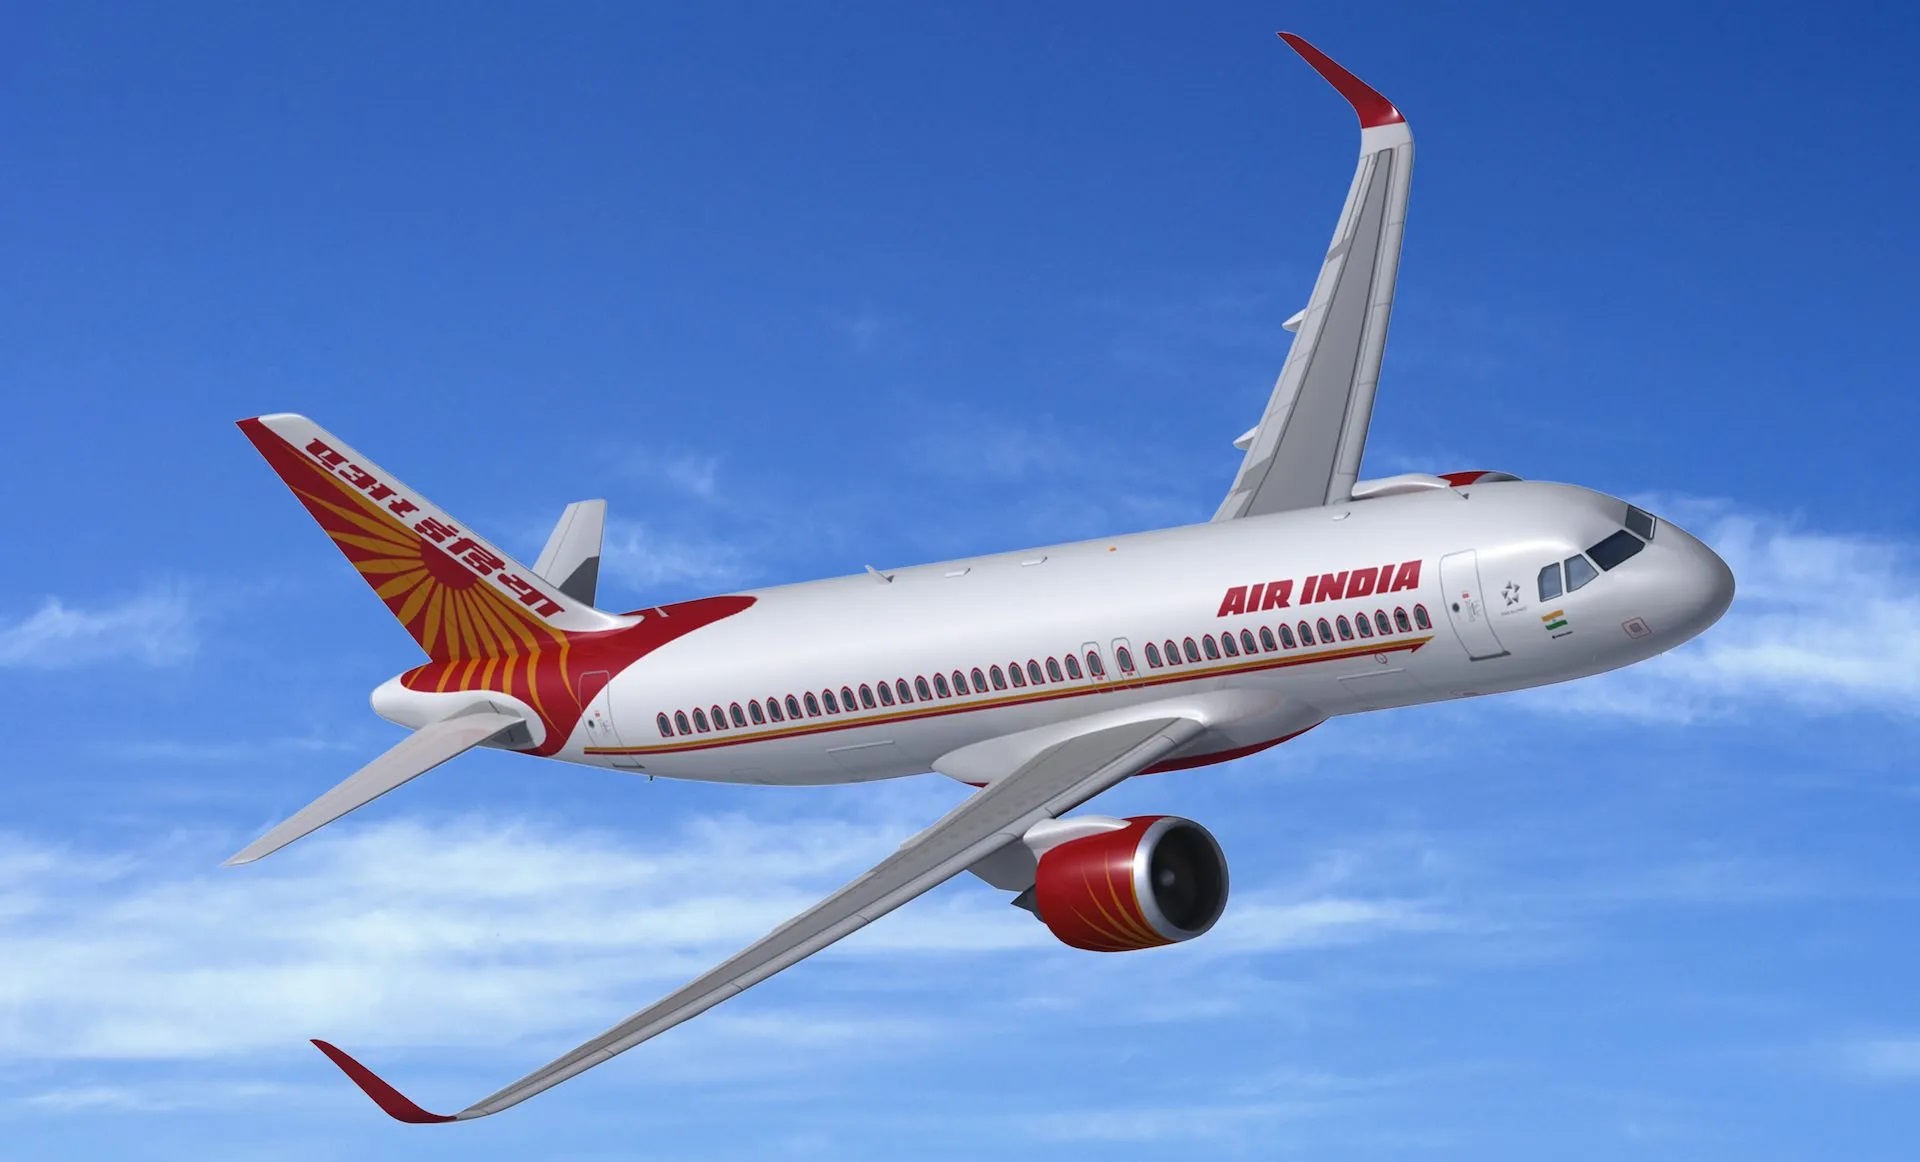 In the relaunch of Air India, Airbus to win 235 single-aisle jet orders